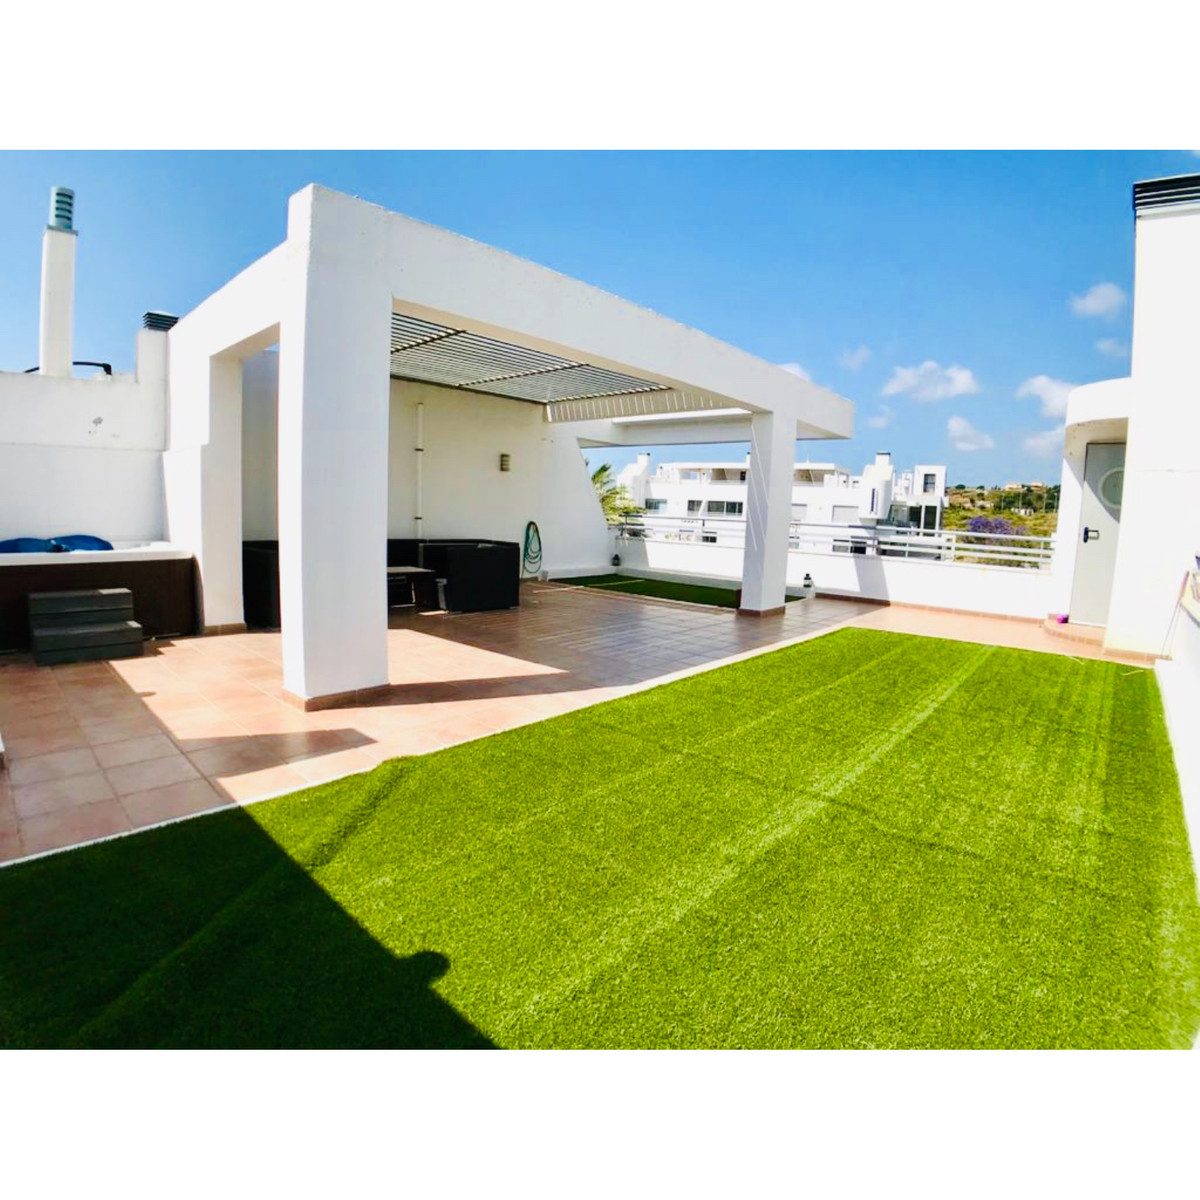 Fantastic penthouse duplex in Riviera del Sol with Sea and Golf views!
A lot of lights, big windows,, Spain